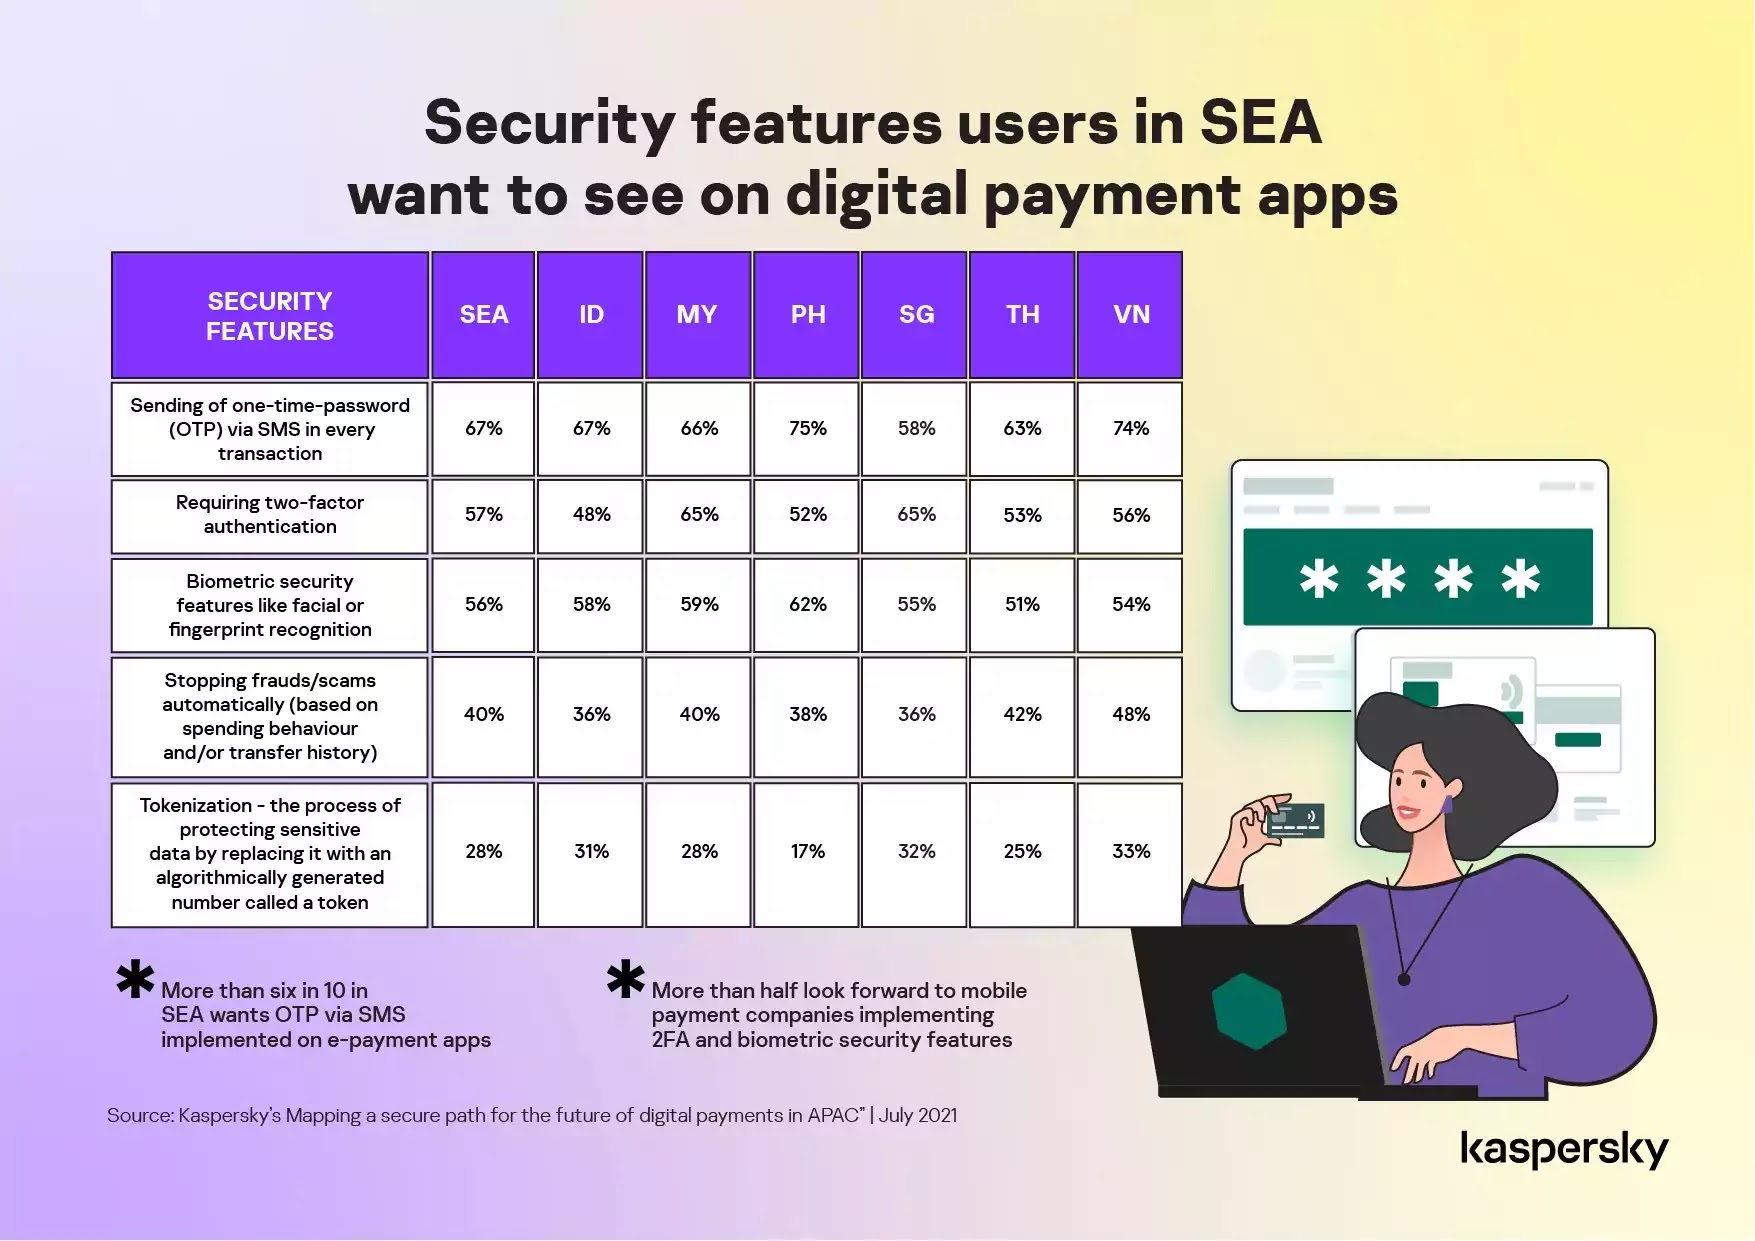 Security features users in SEA want to see on digital payment apps